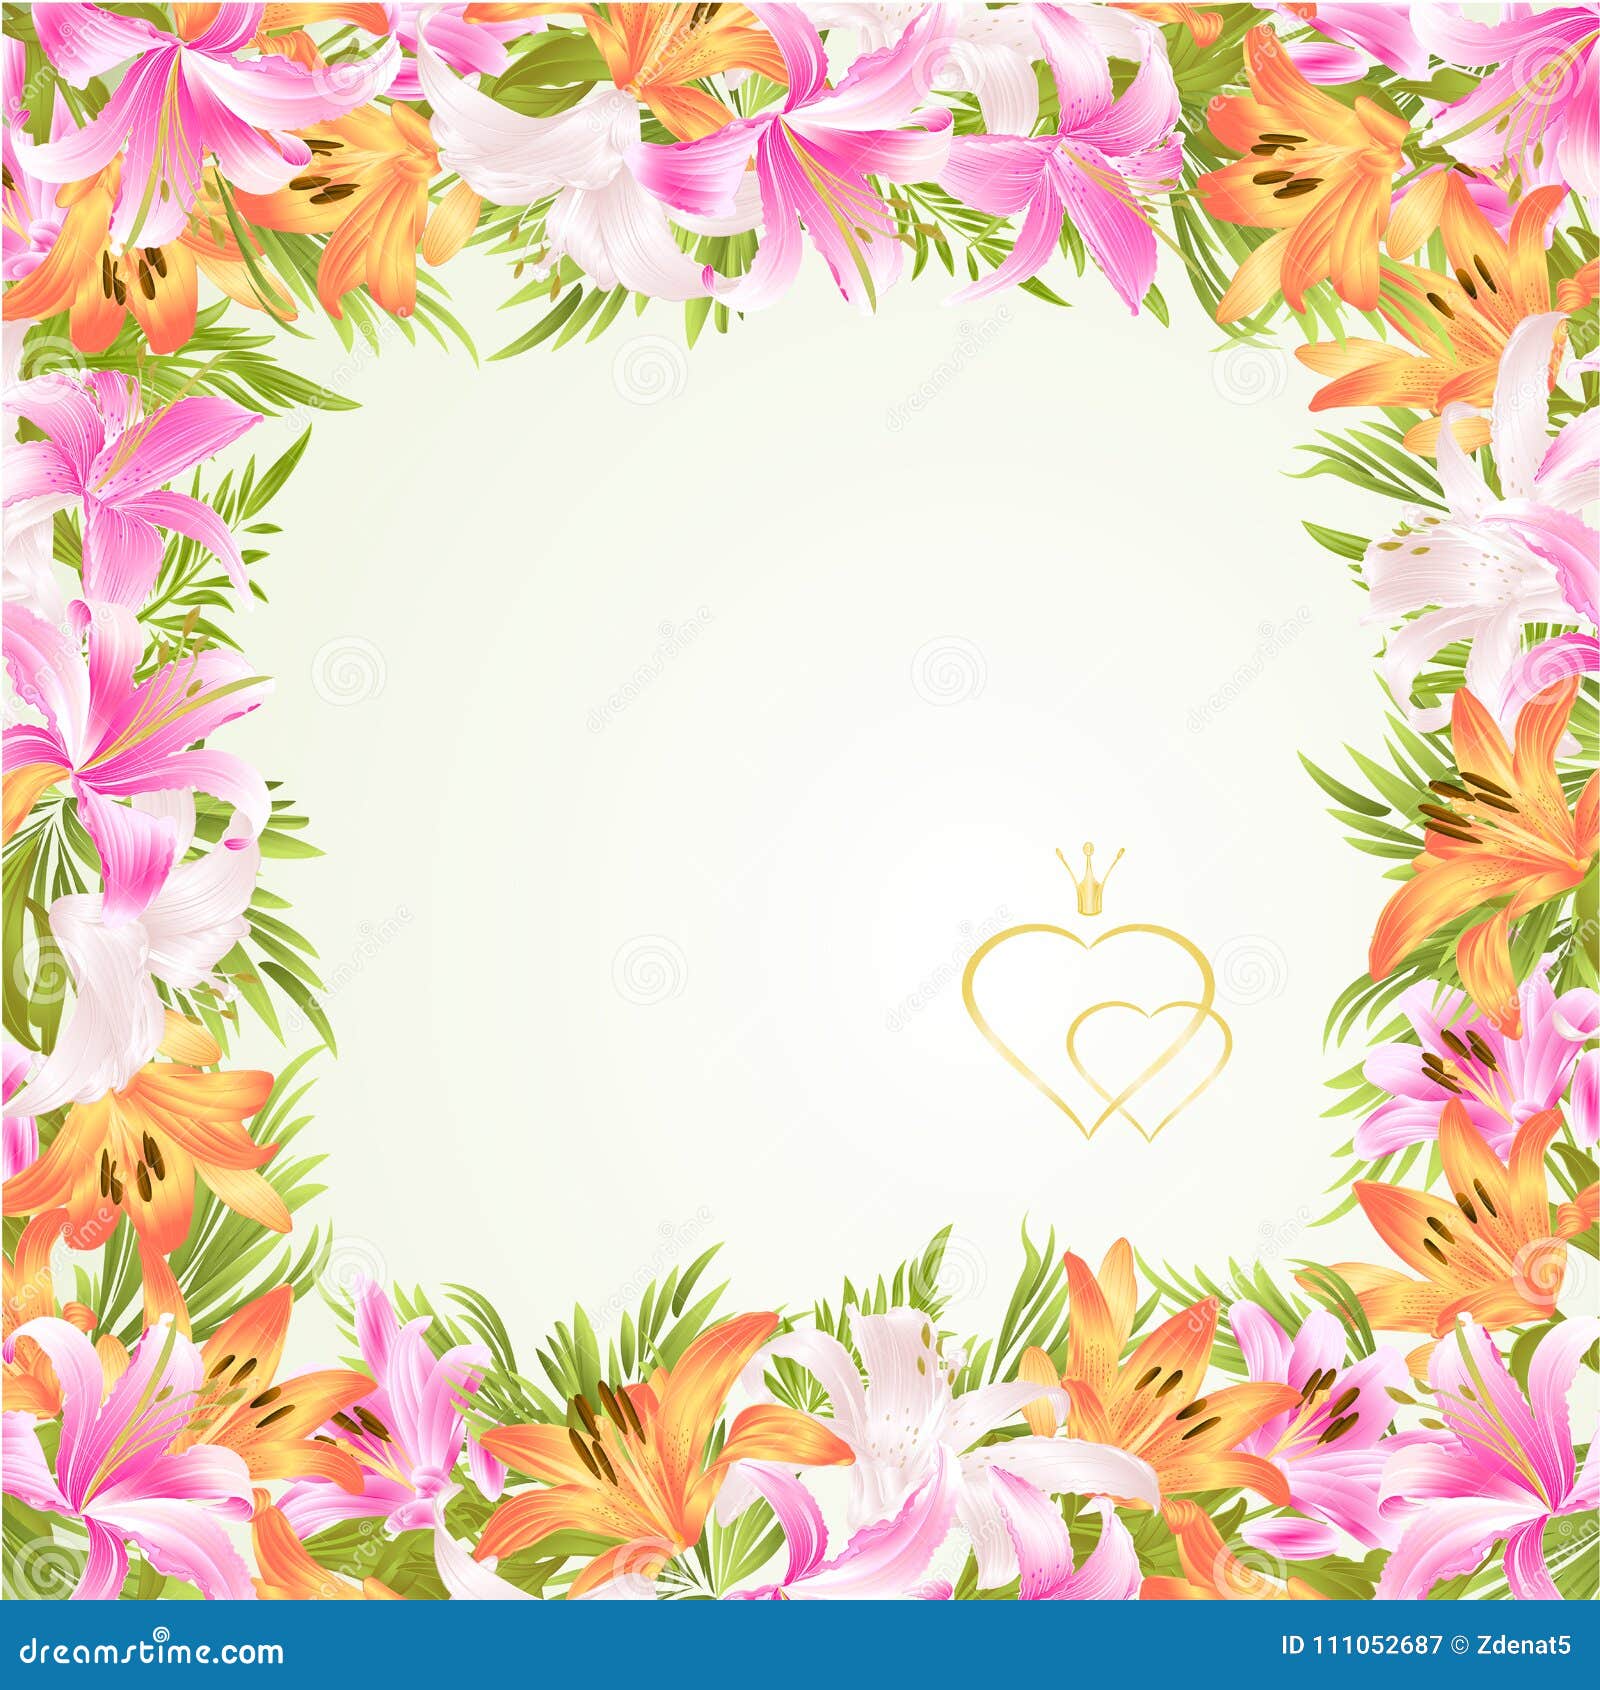 Frame Floral Border Festive Background with Blooming Lilies and Buds ...